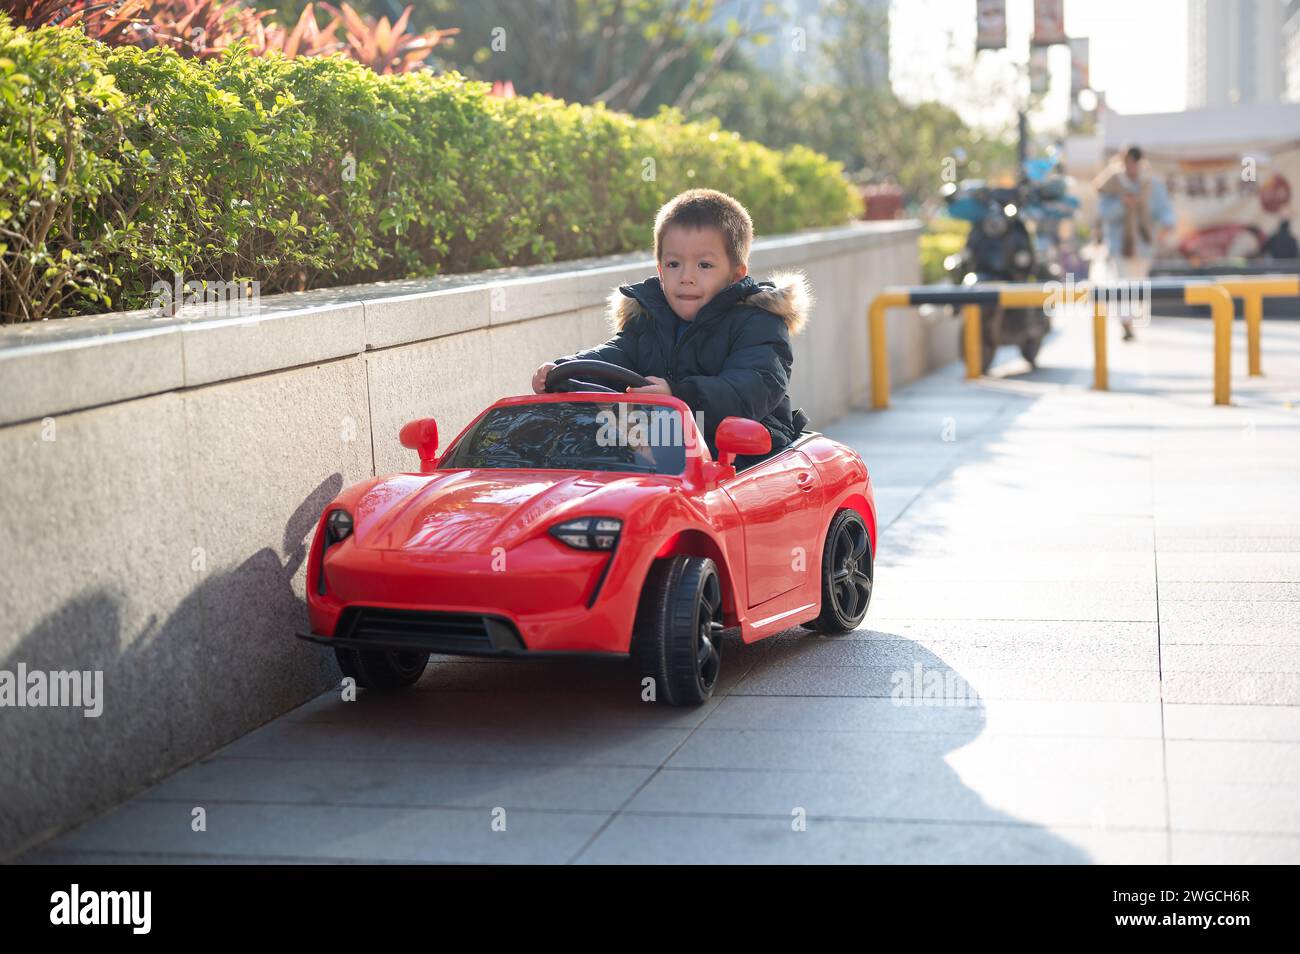 A young multiracial toddler joyfully navigates the neighborhood road in a red sports toy car, donning a big smile as they take control of their toy ca Stock Photo